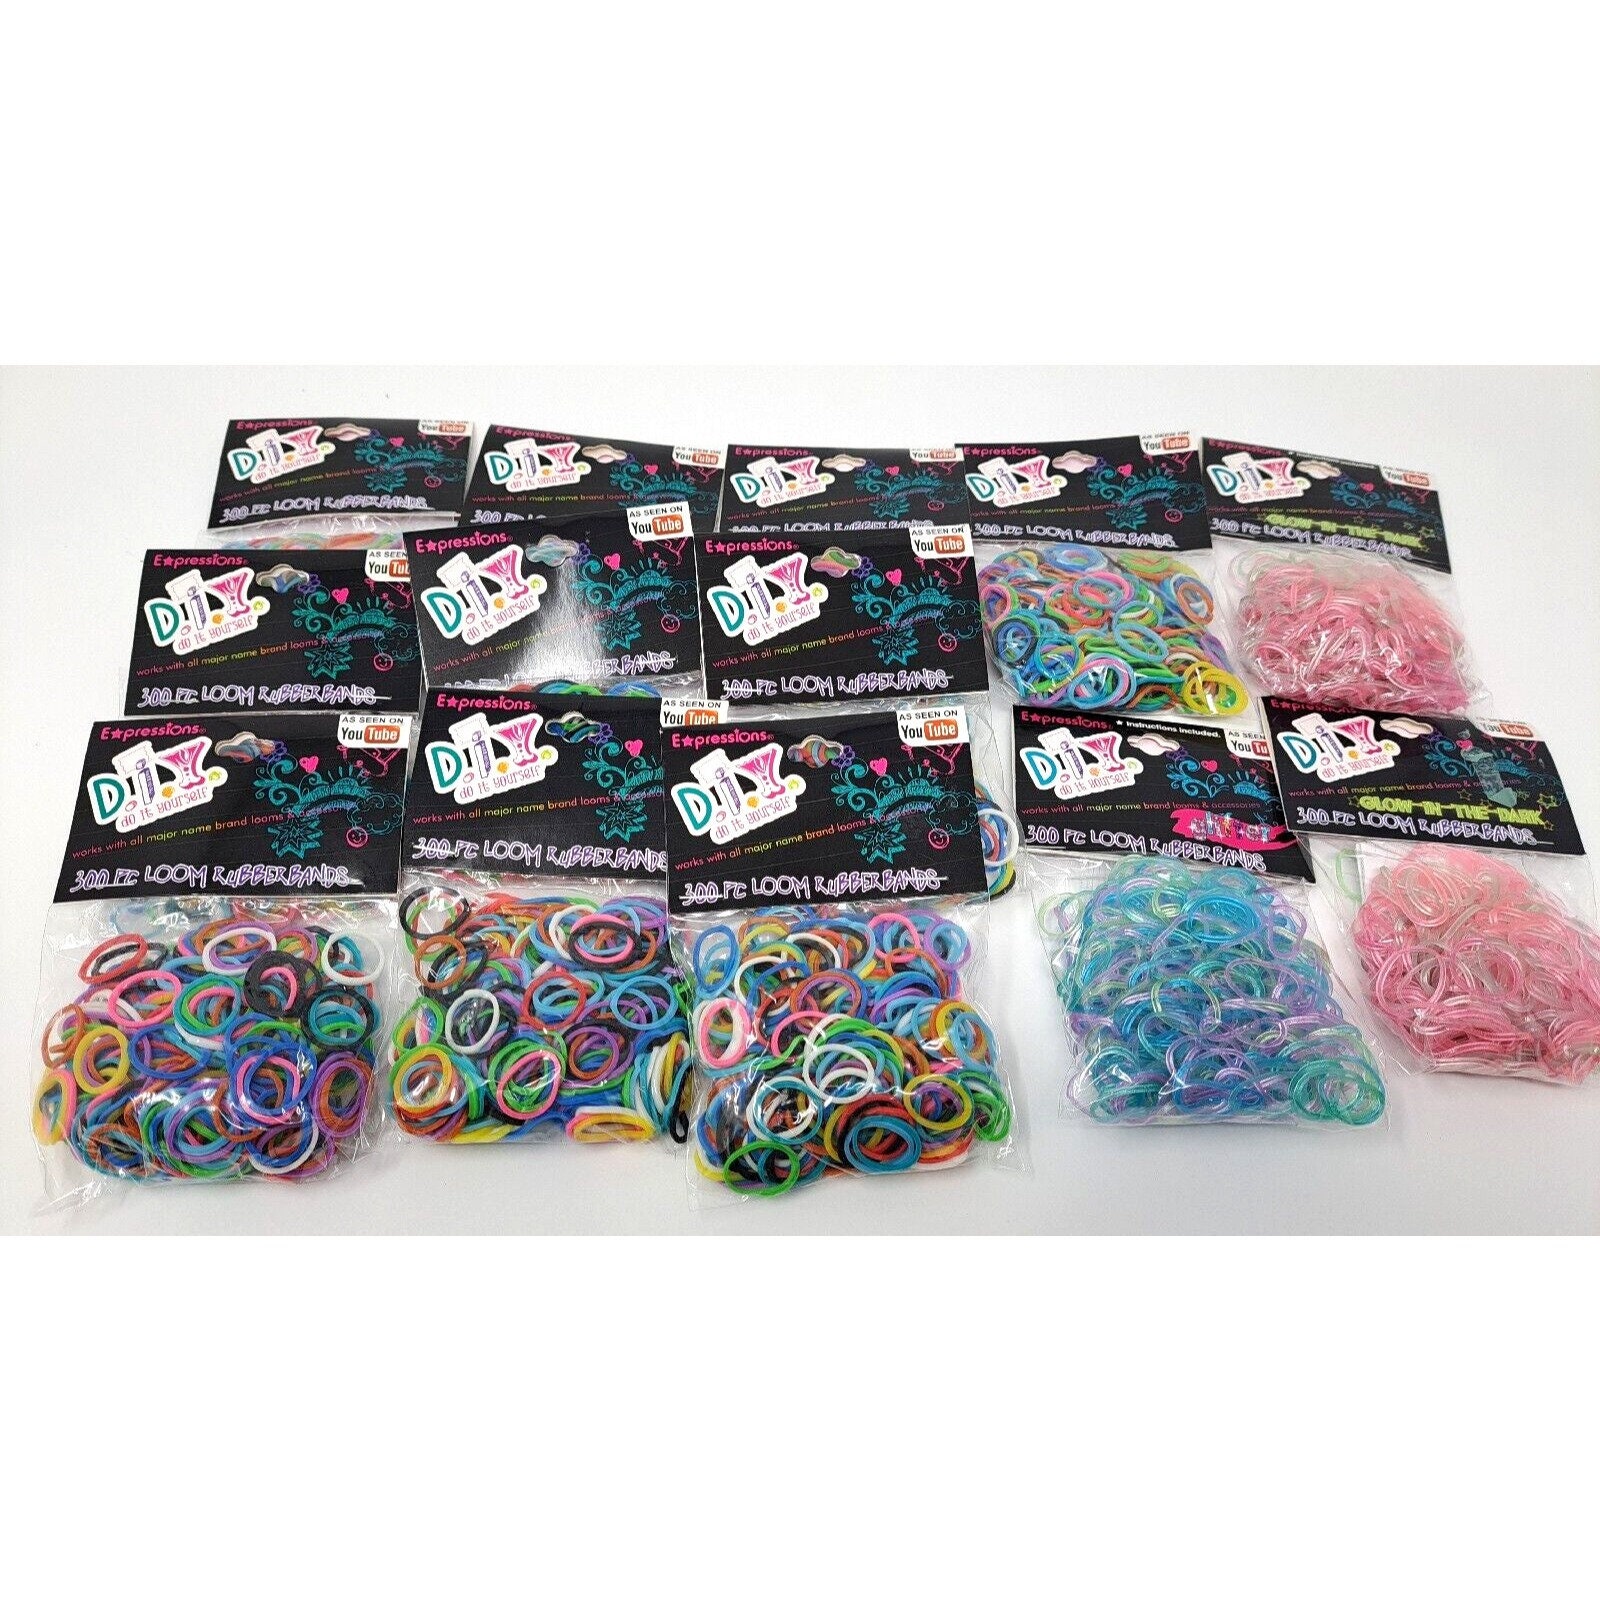 36 Colors 3600 Rubber Bands Clean /glitter /glow in Dark /charms / Crochets  /beads /chips for DIY Loom Bracelet Kit in Plastic Box D-14 